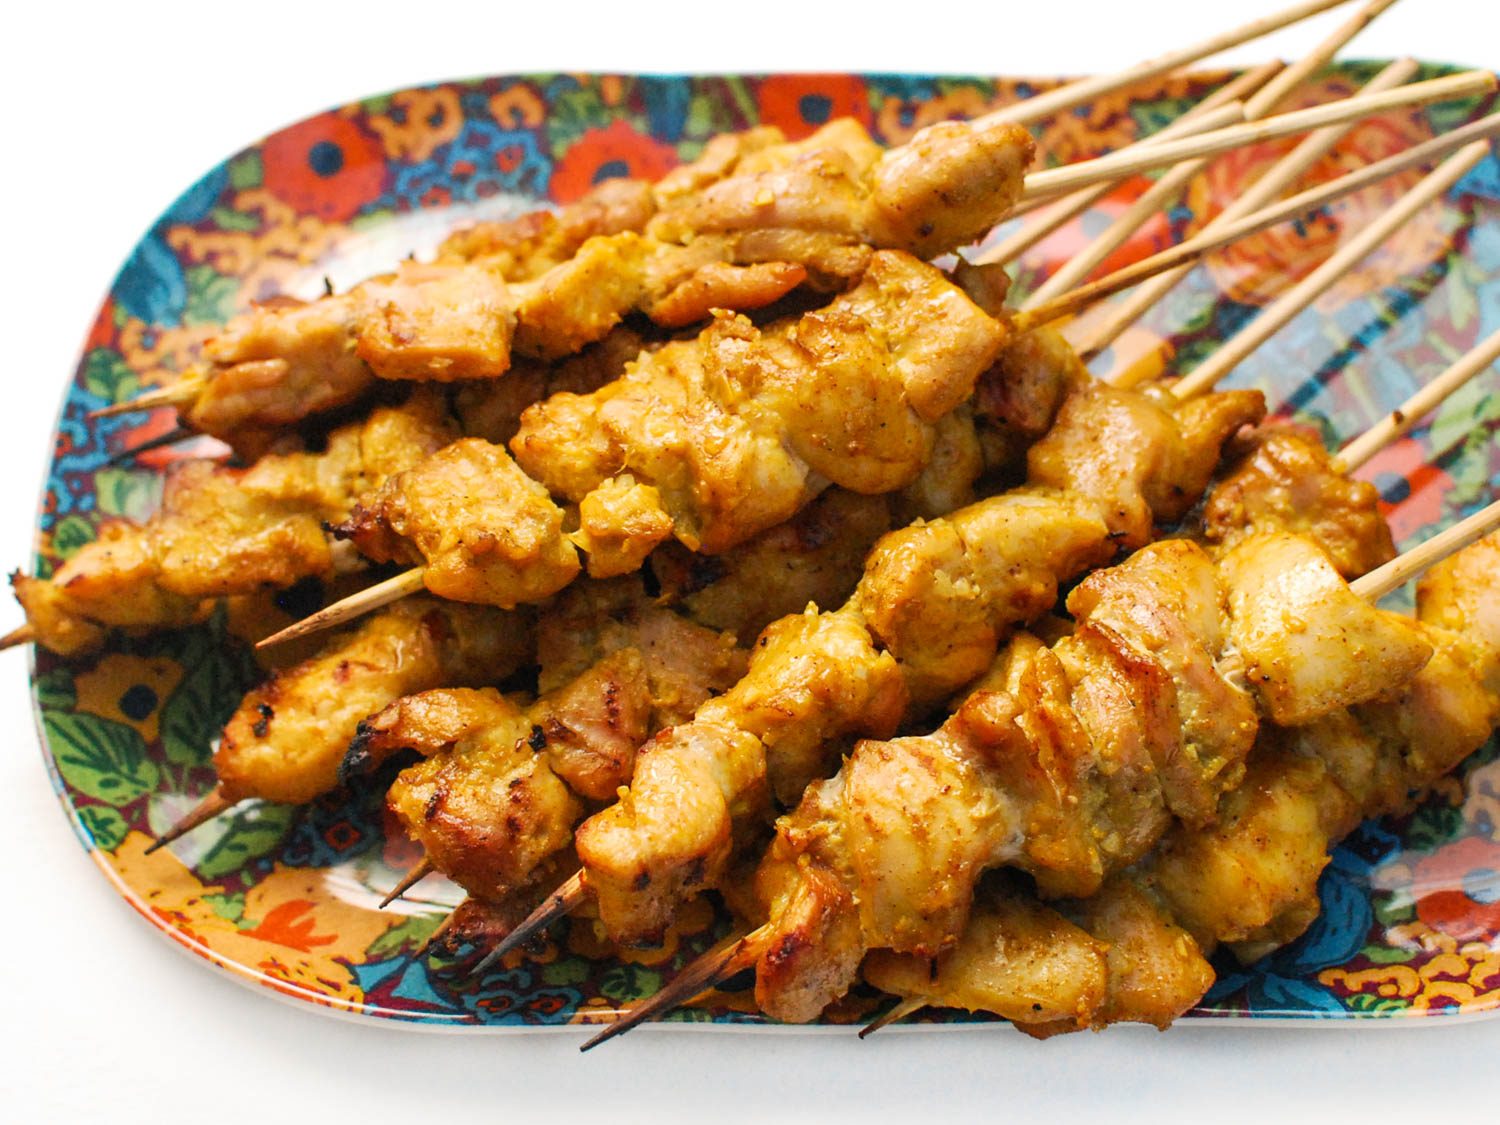 http://www.seriouseats.com/recipes/2015/08/grilled-curry-chicken-kebab-recipe.html